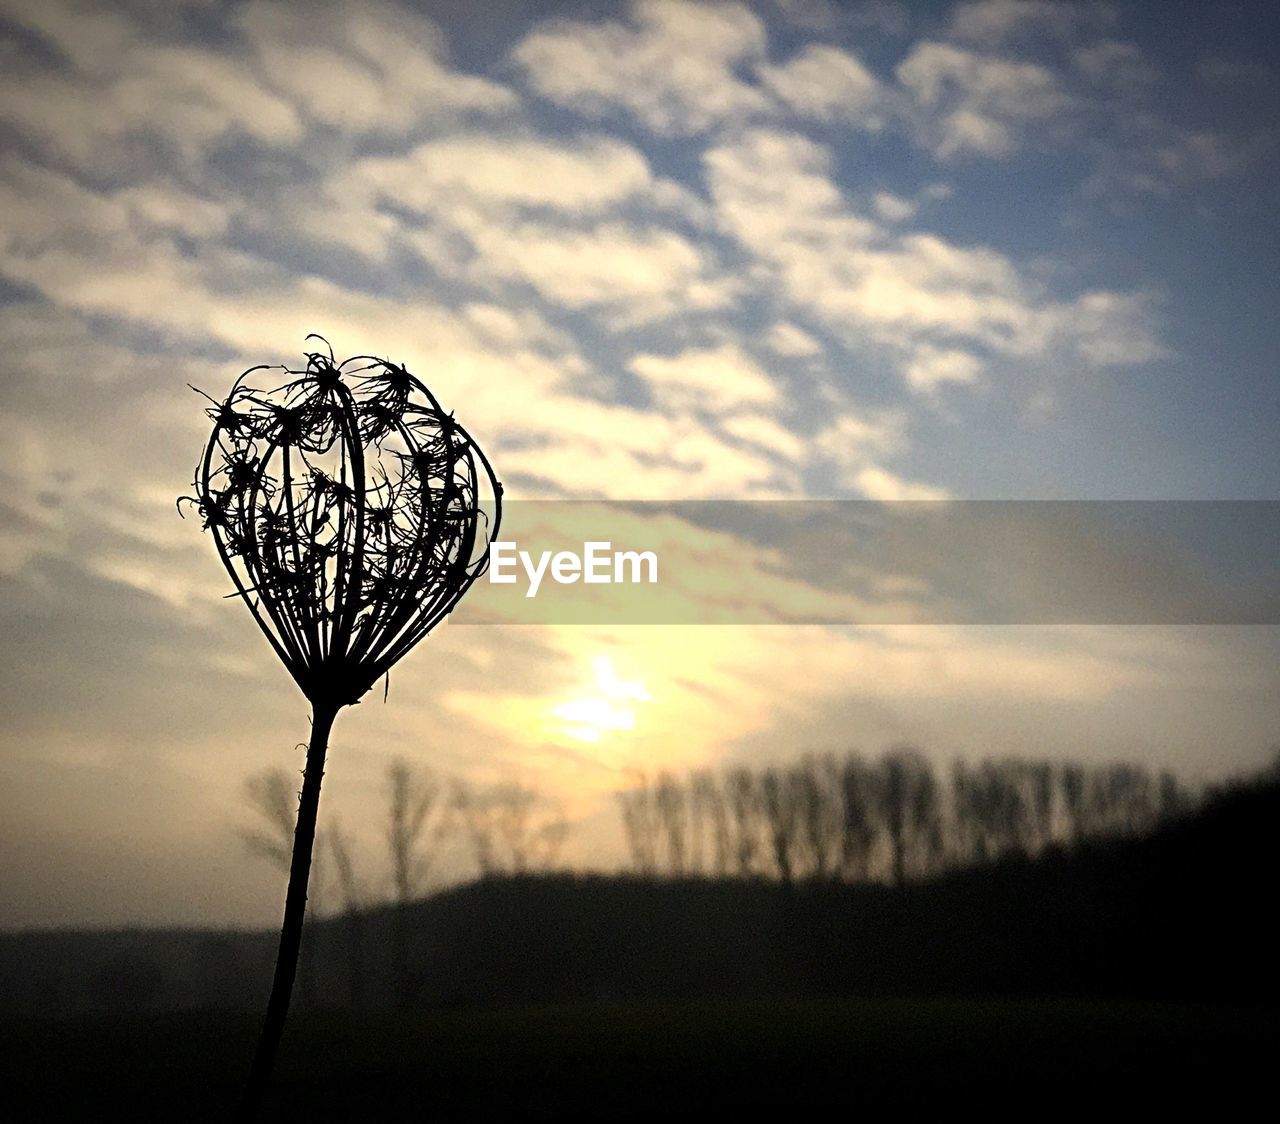 Silhouette dry flower on field against cloudy sky during sunset